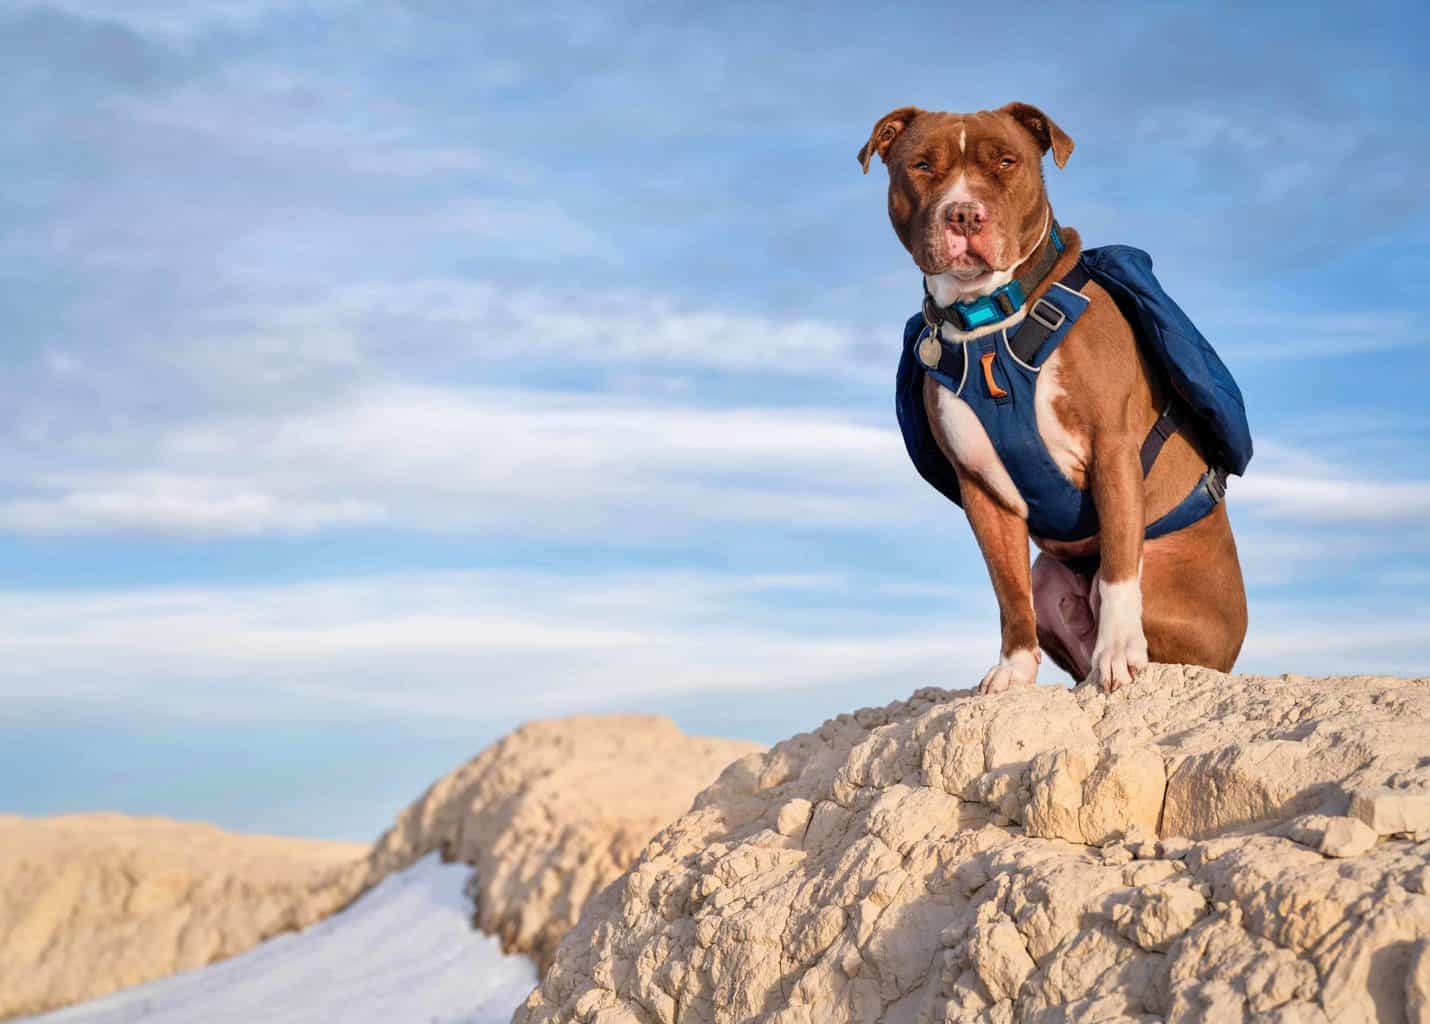 Red pitbull wears backpack for adventure with owner. When backpacking with your dog, follow leash rules, pick up after your pet and ensure that your dog has had their proper vaccinations.